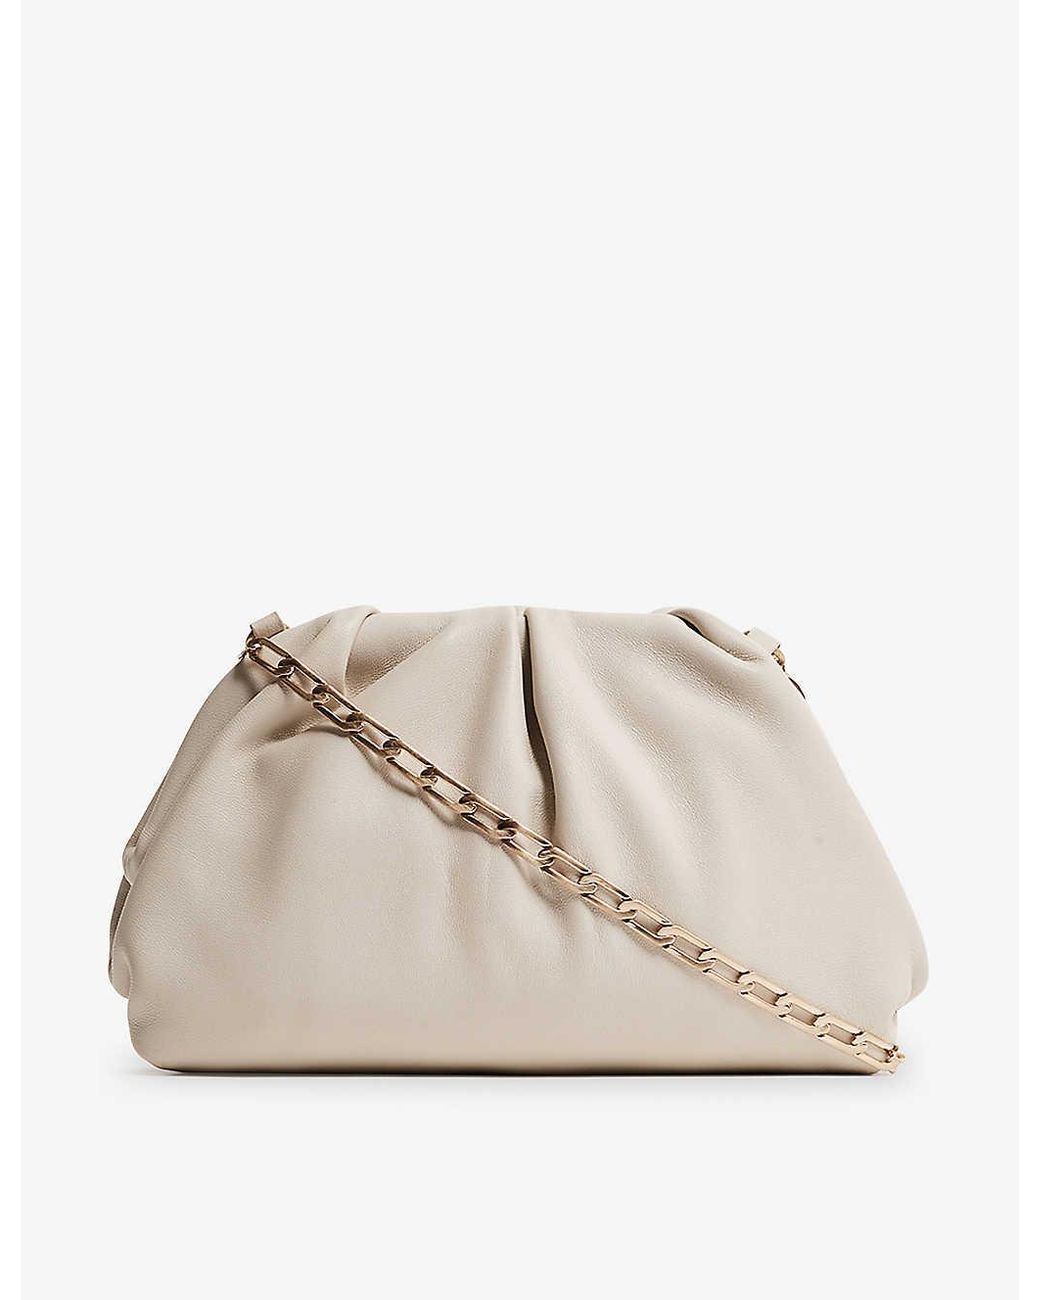 Reiss Elsa Chain-strap Nappa-leather Clutch Bag in Natural | Lyst